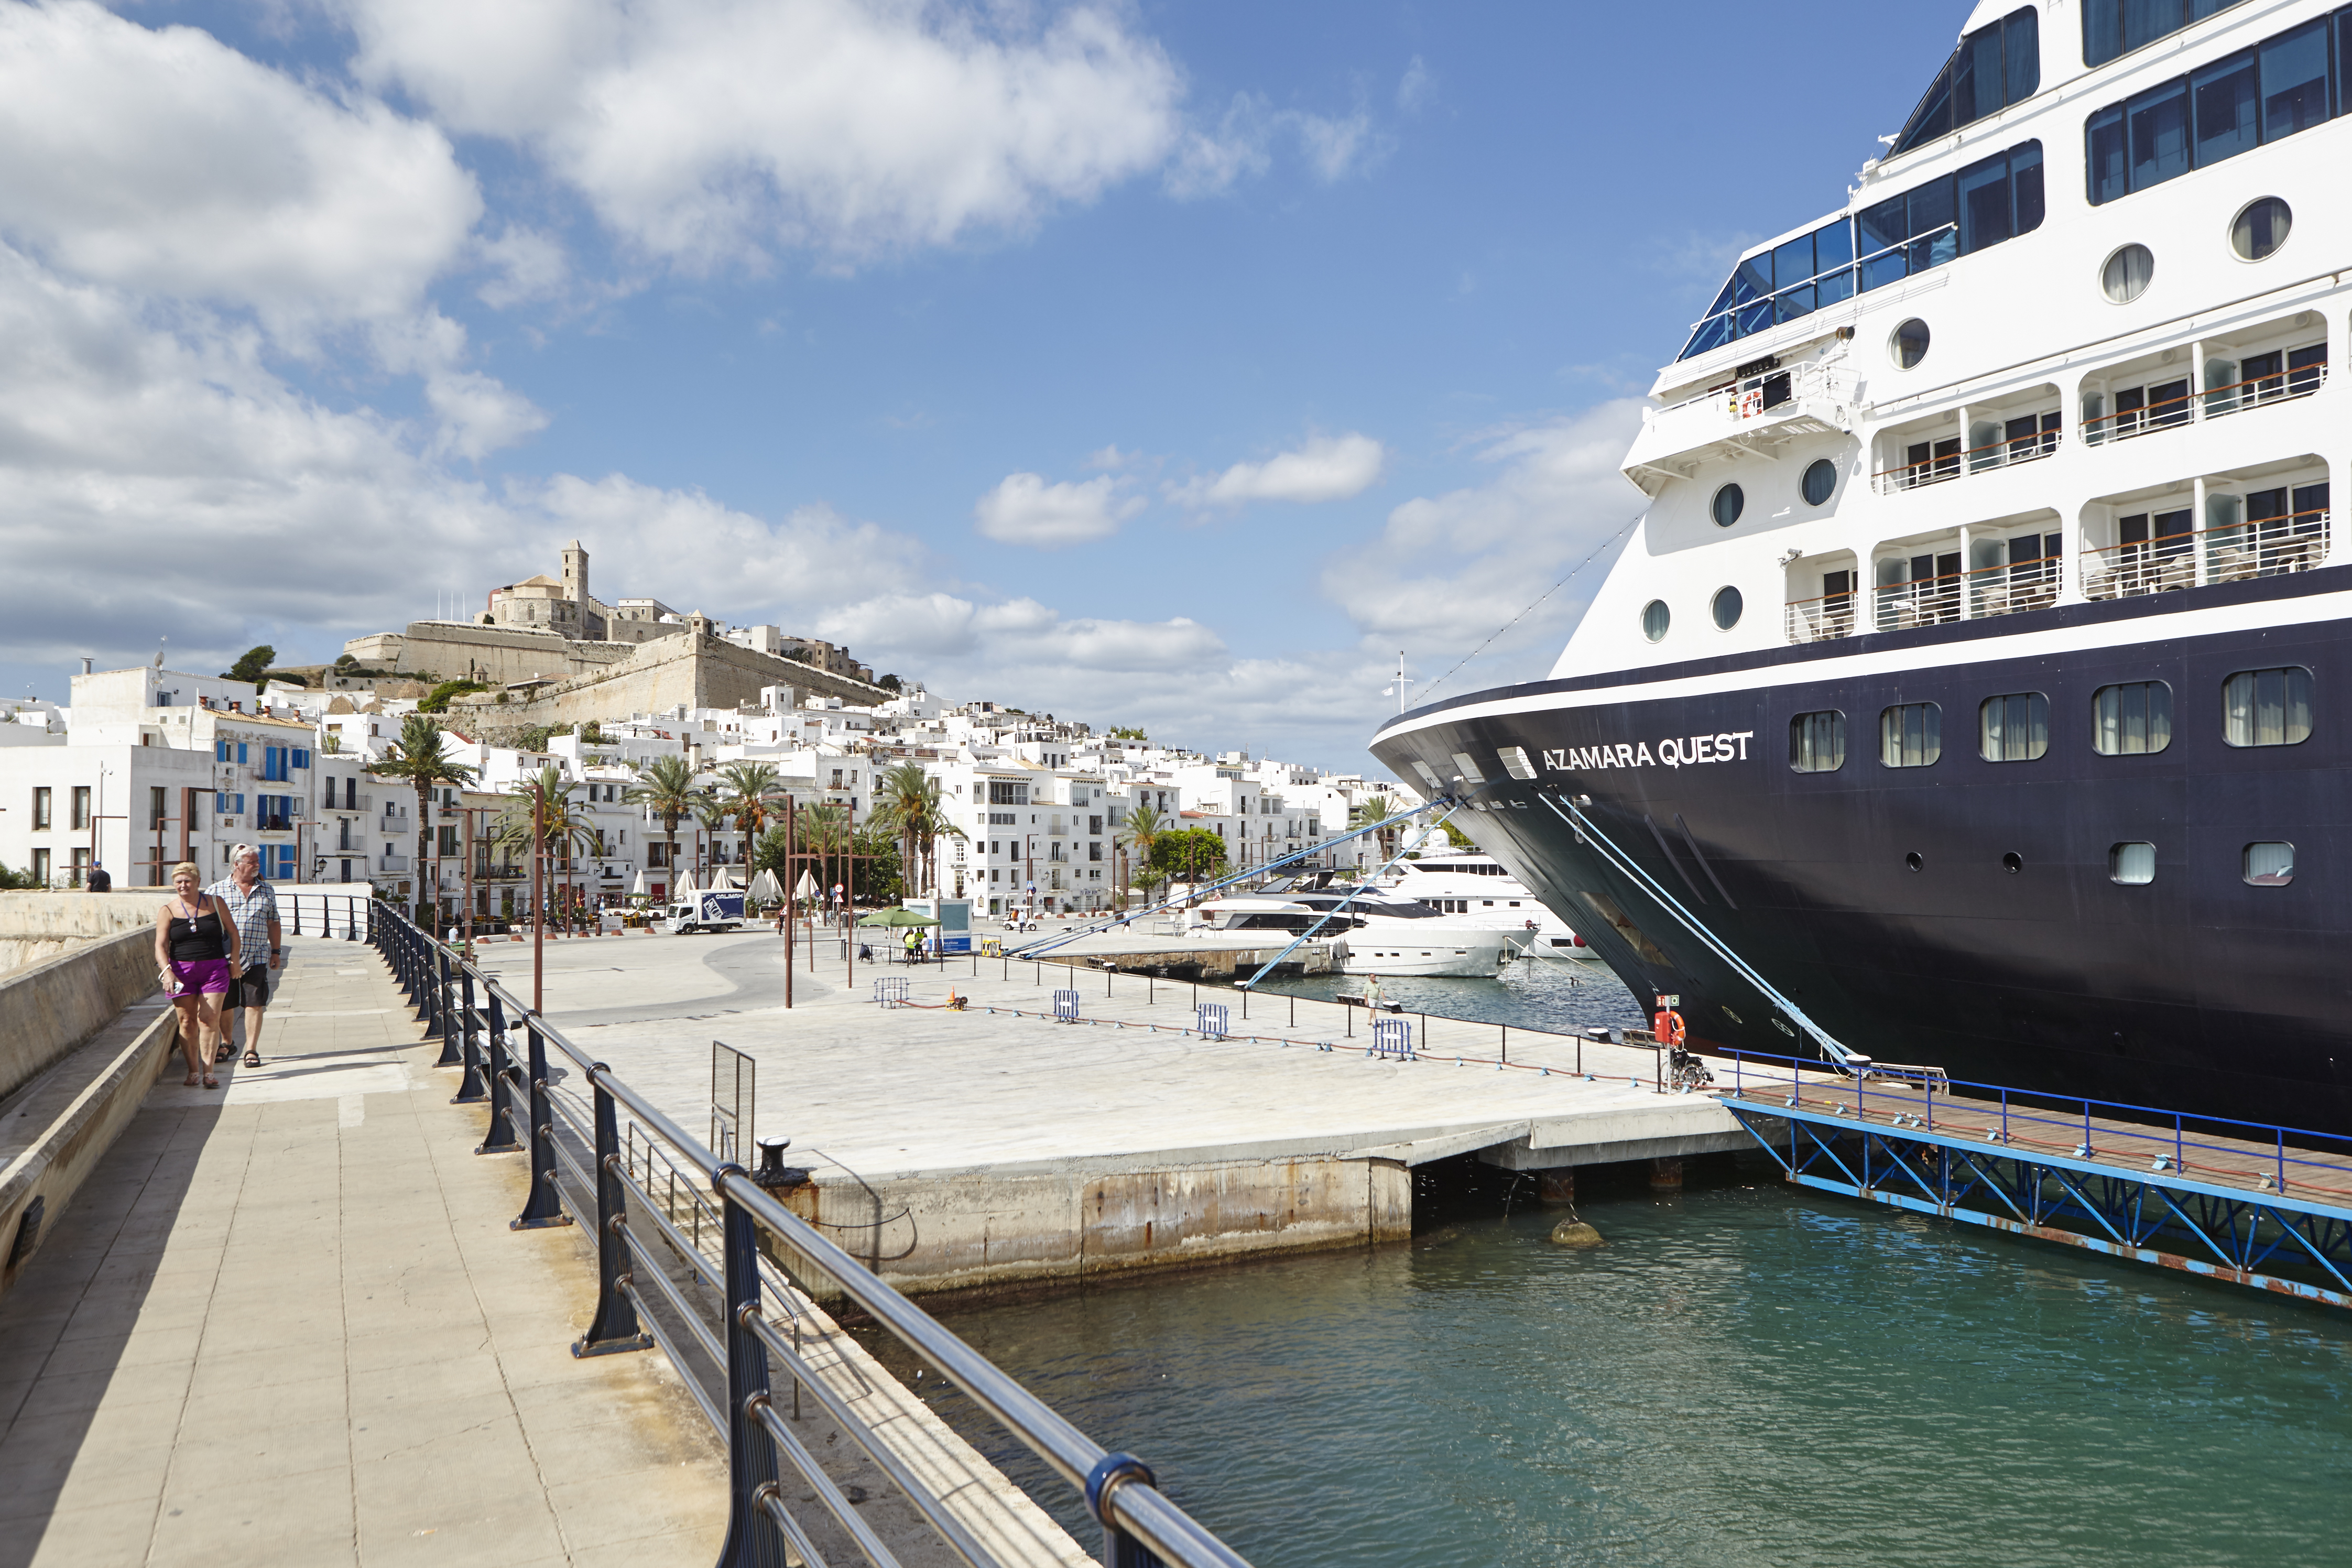 The APB awards Igy Gestora Marinas Spain the management contract for large yacht moorings in the Levante basin of Eivissa port